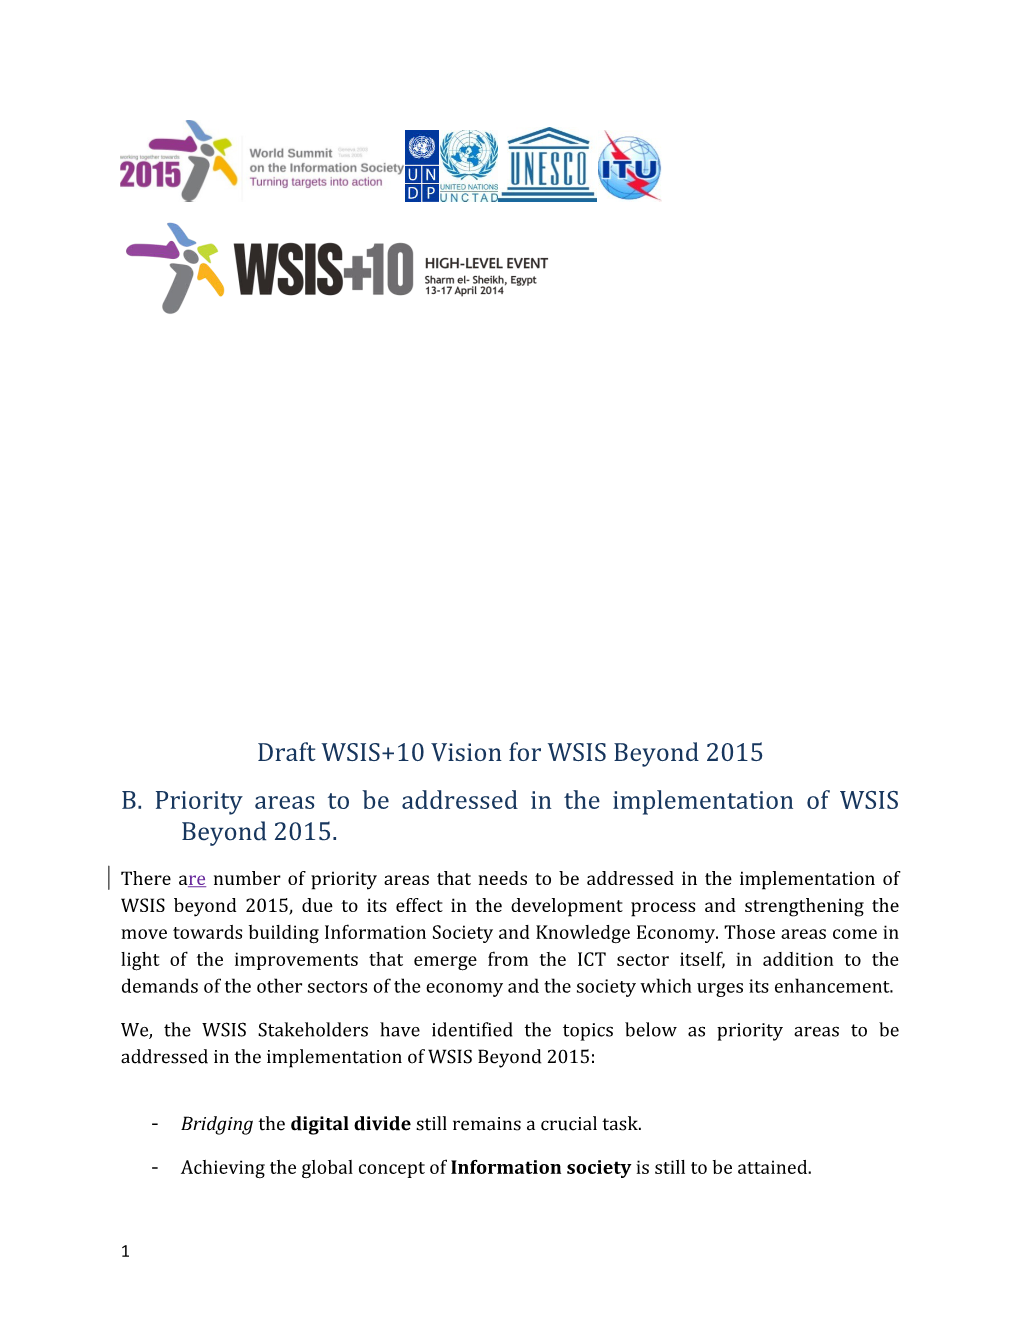 B. Priority Areas to Be Addressed in the Implementation of WSIS Beyond 2015